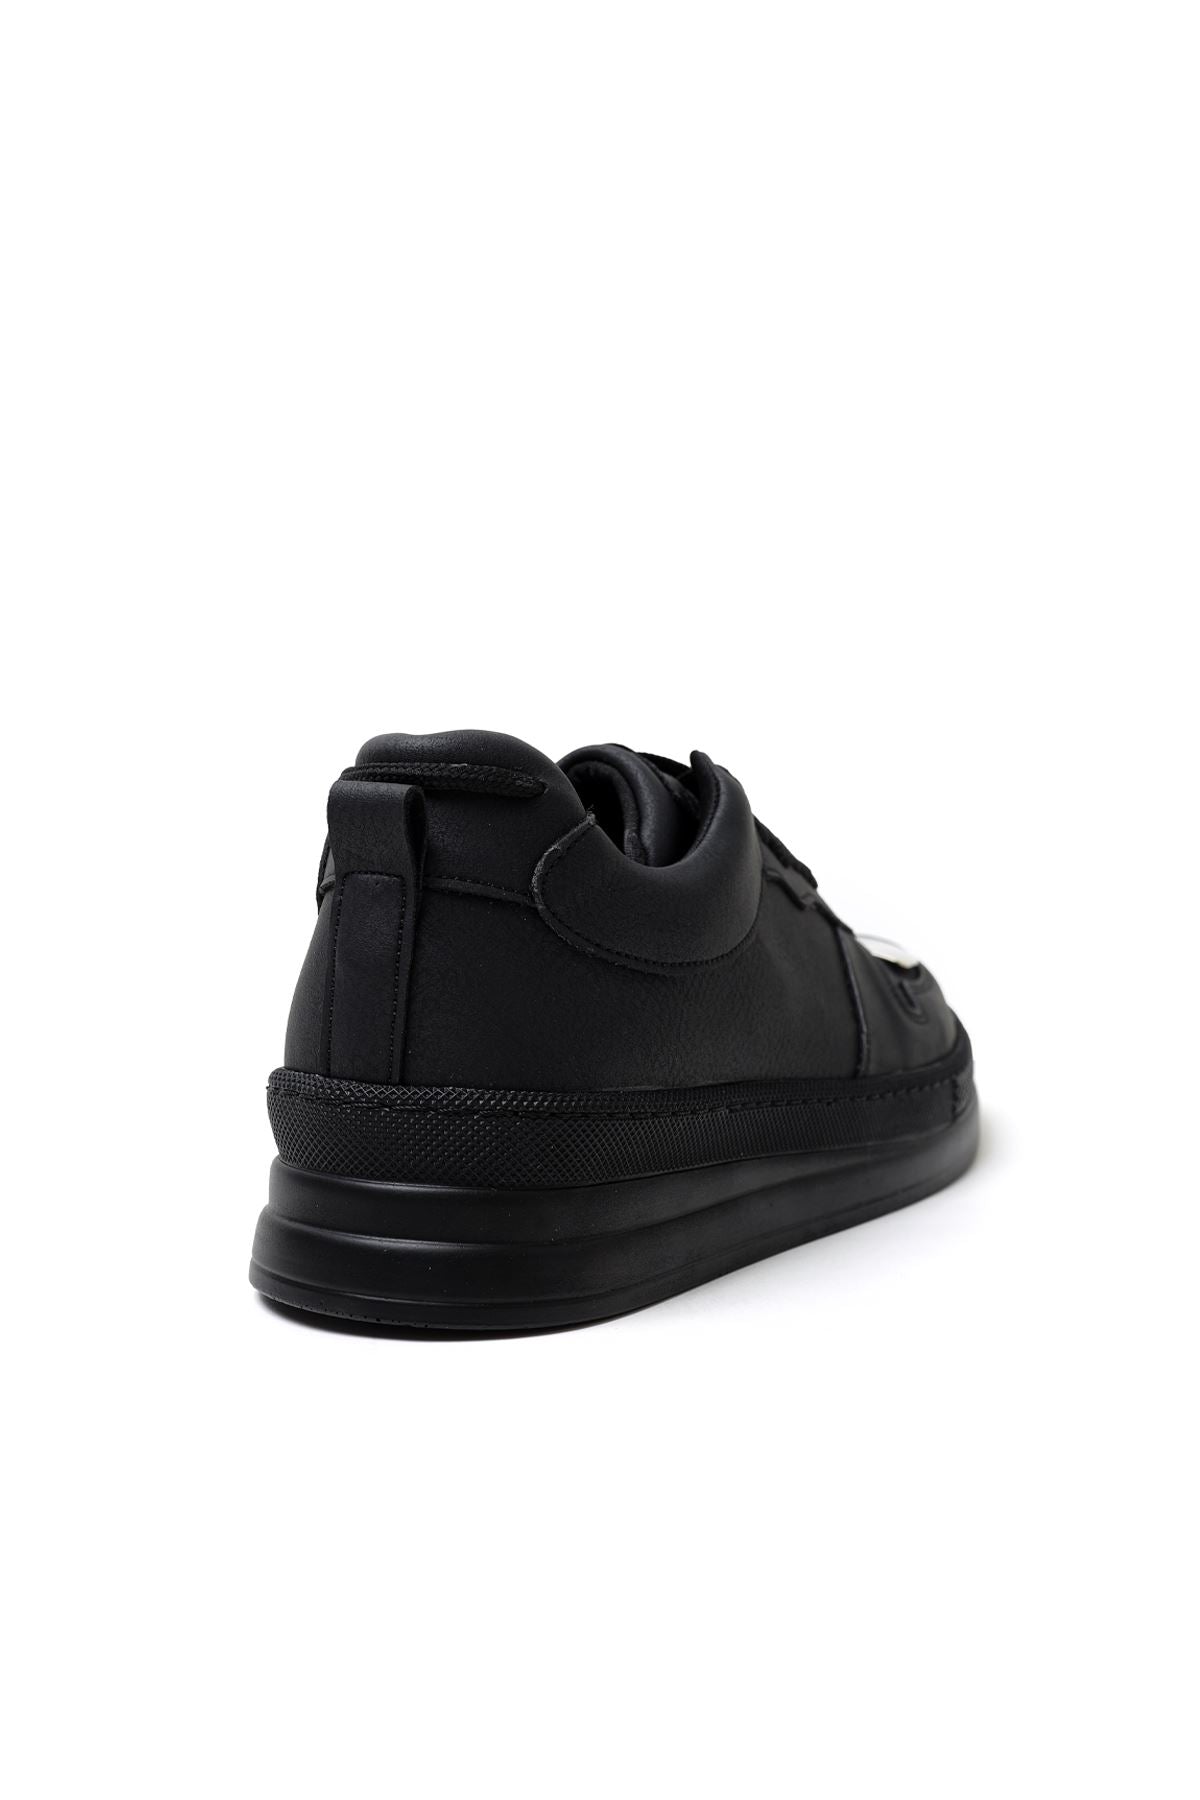 CH185 ST Men's Shoes BLACK - STREETMODE ™